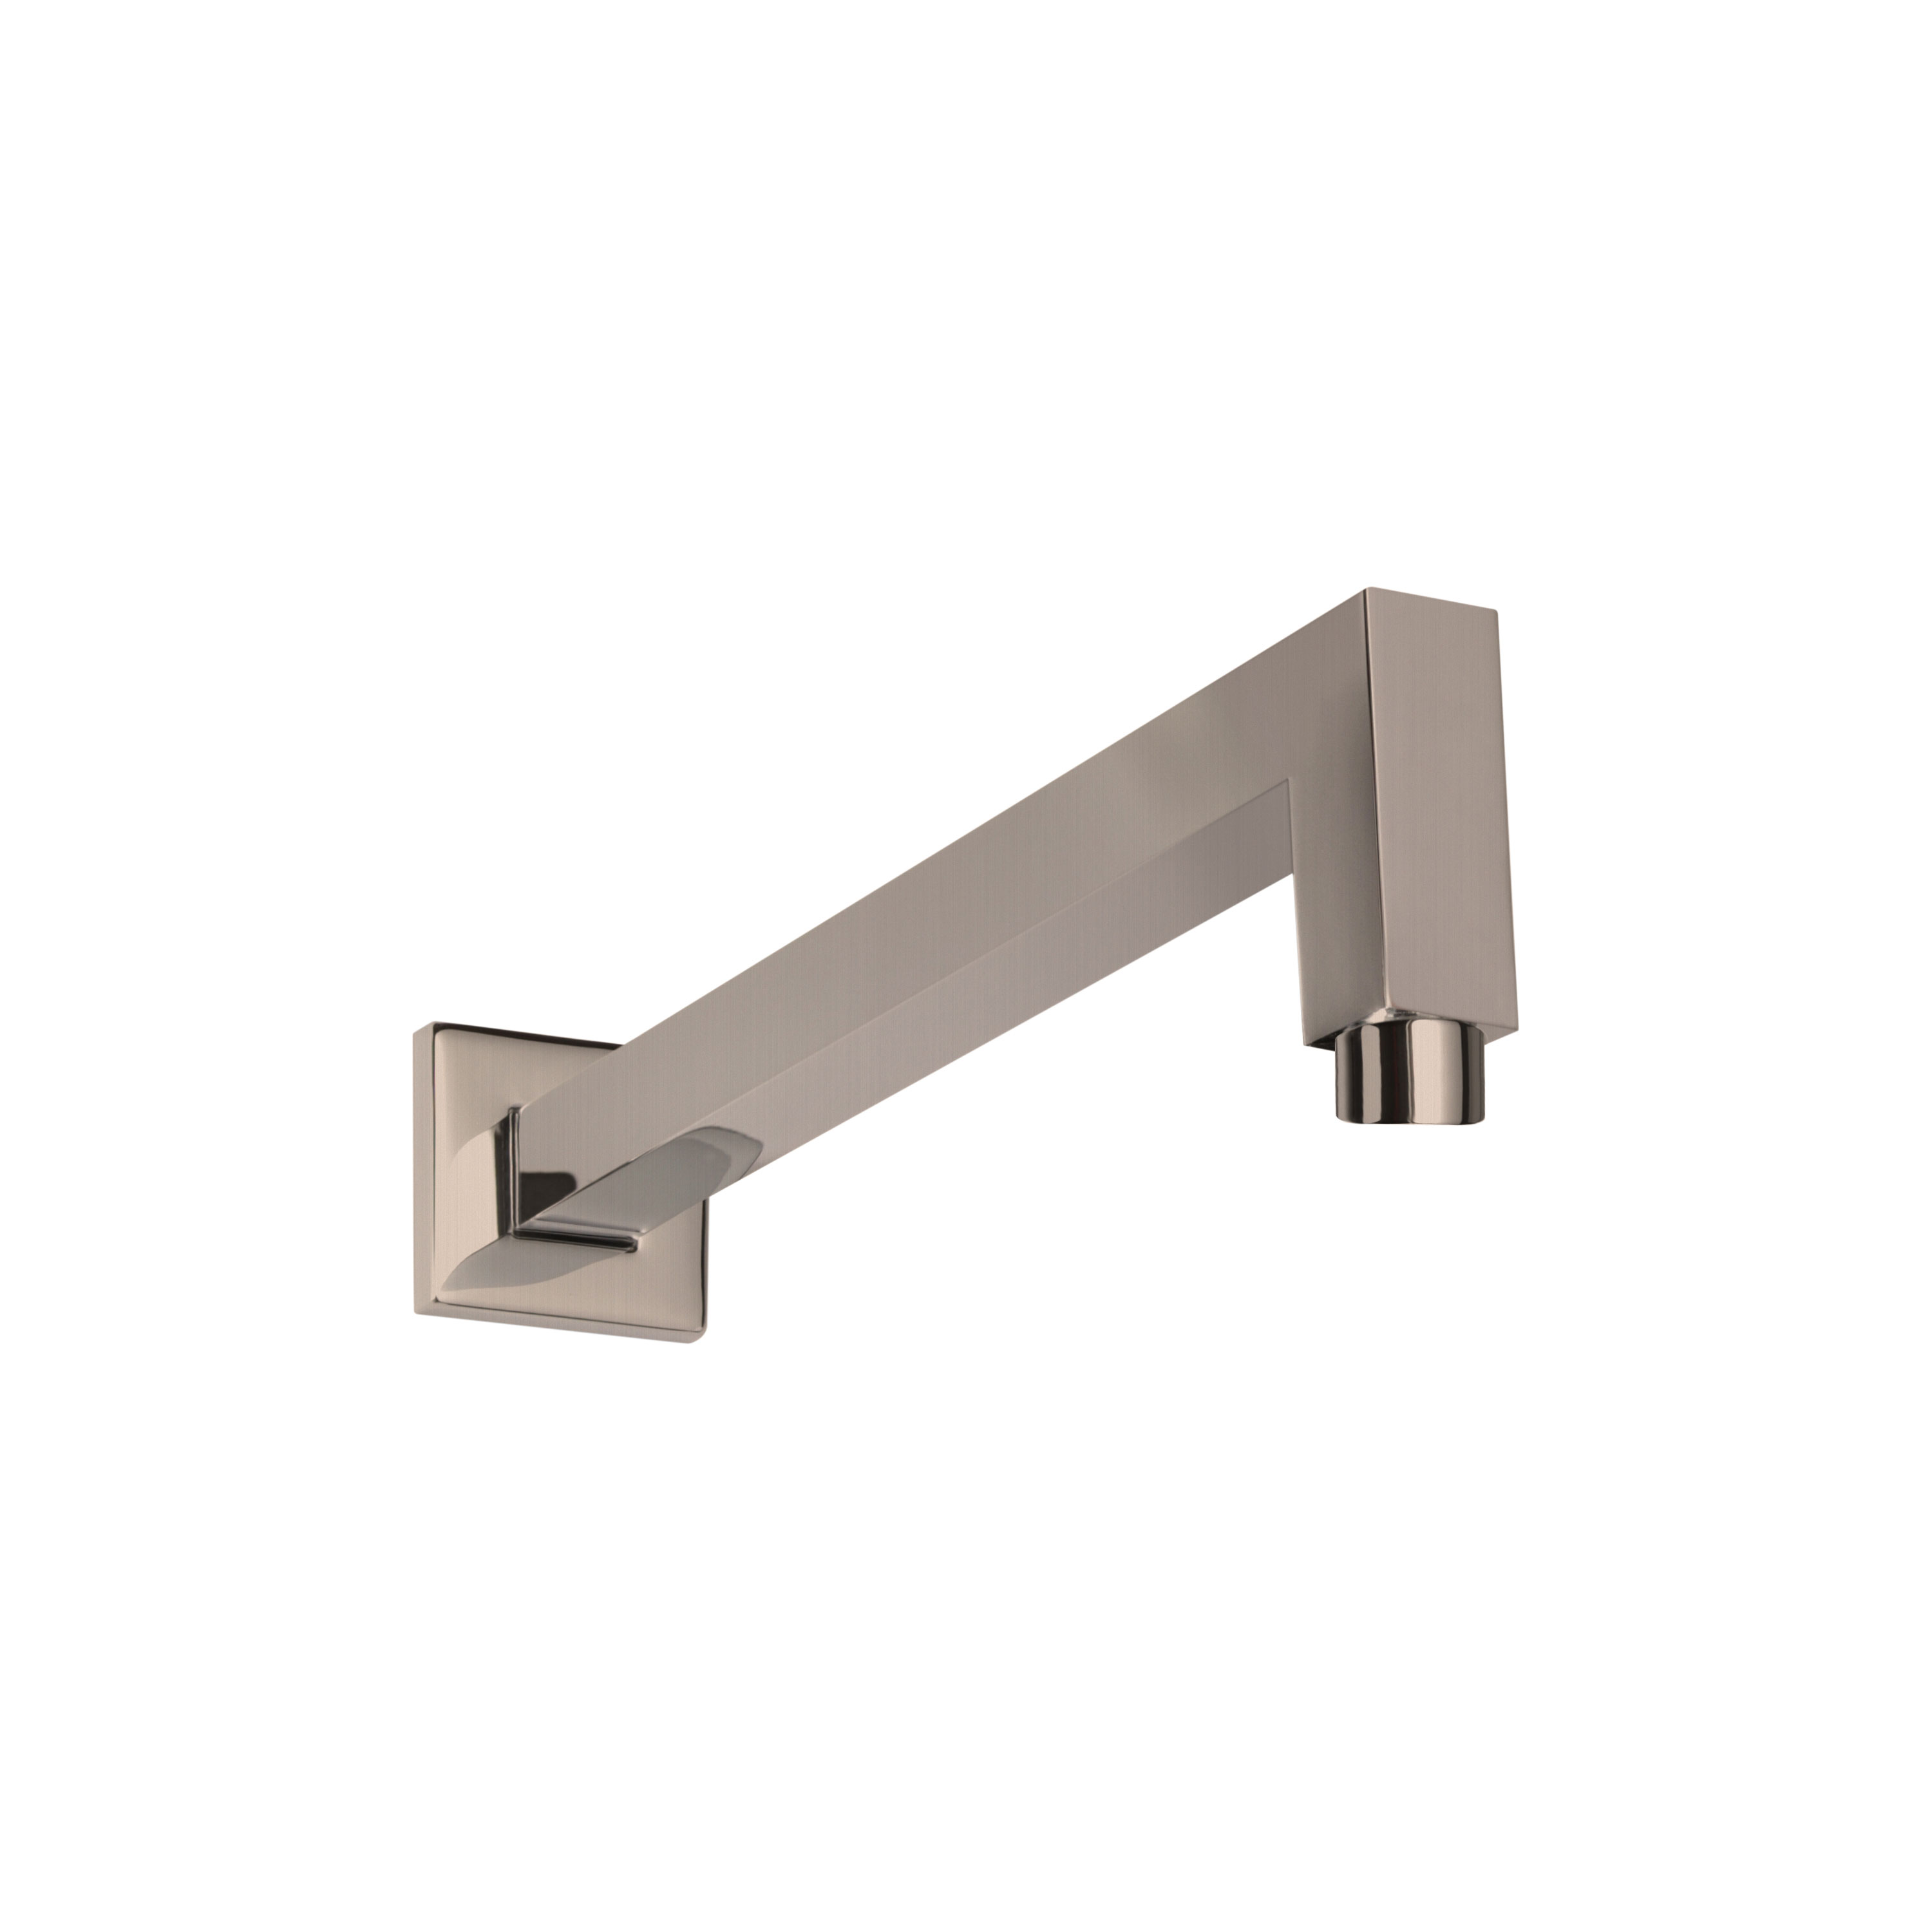 Thermasol 15-1004-SN 16" - 90 Degree Wall Shower Arm Square - Satin Nickel